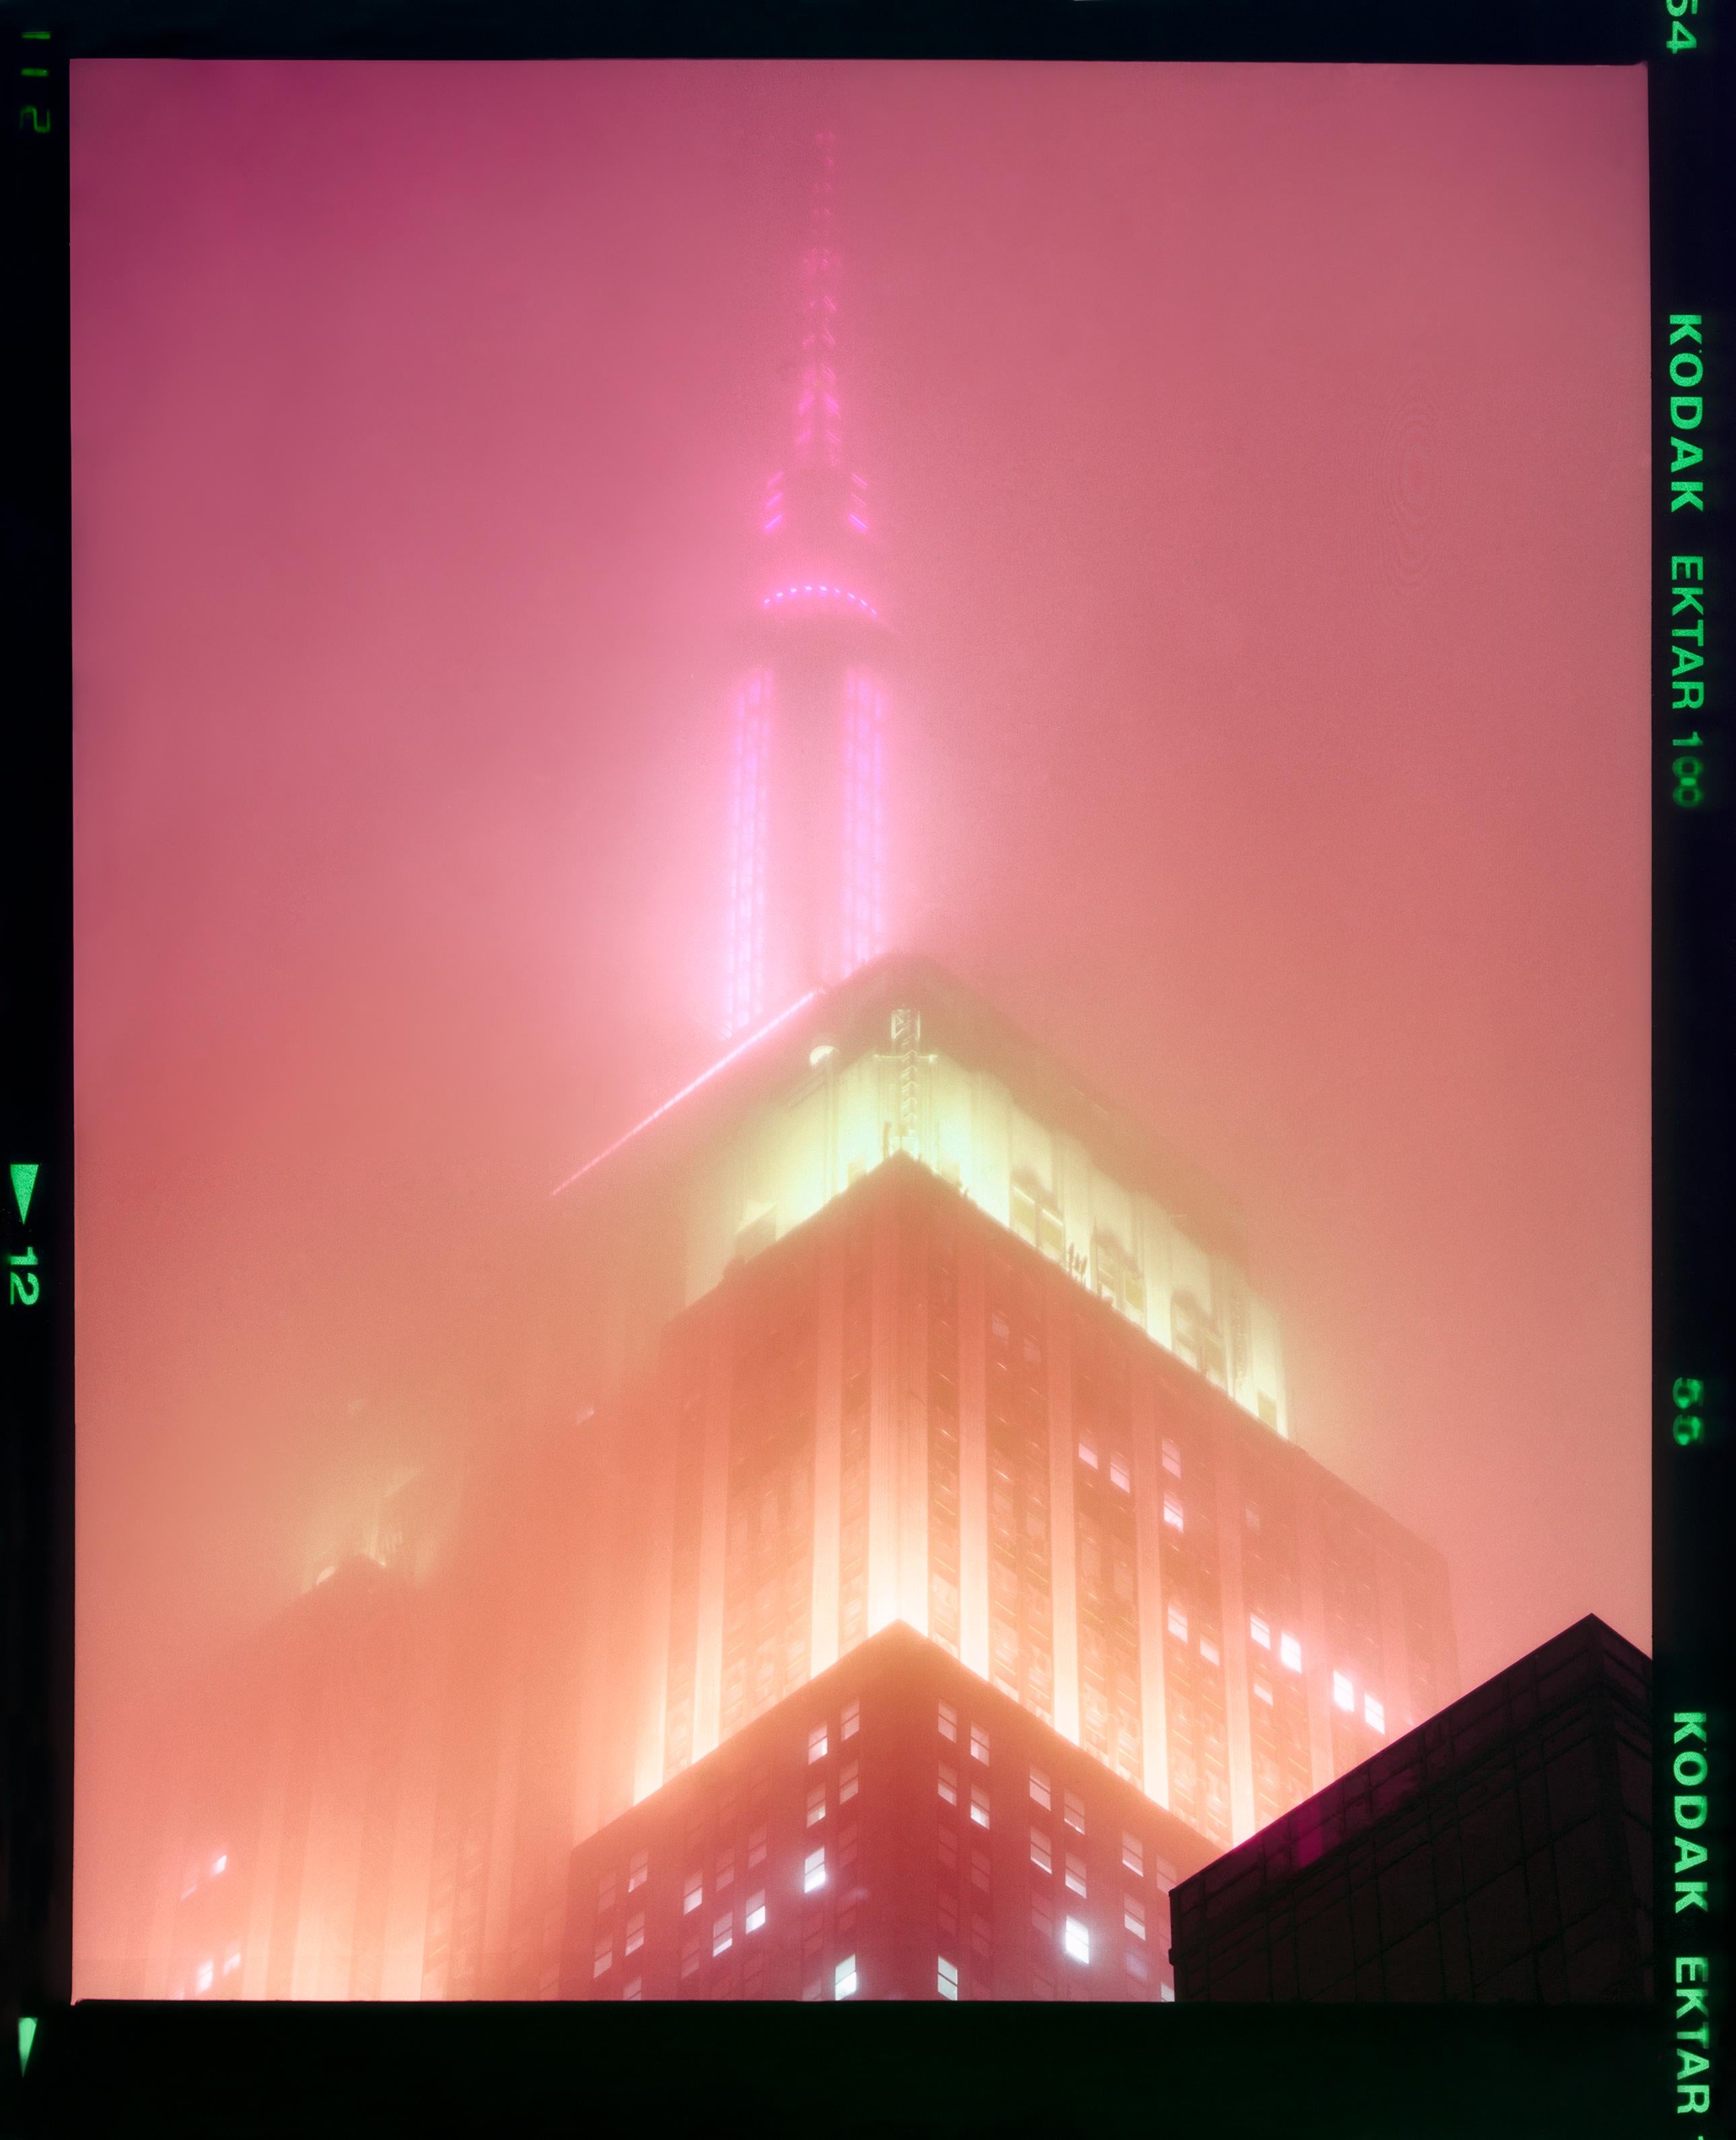 NOMAD III (Film Rebate), New York - Conceptual Architectural Color Photography